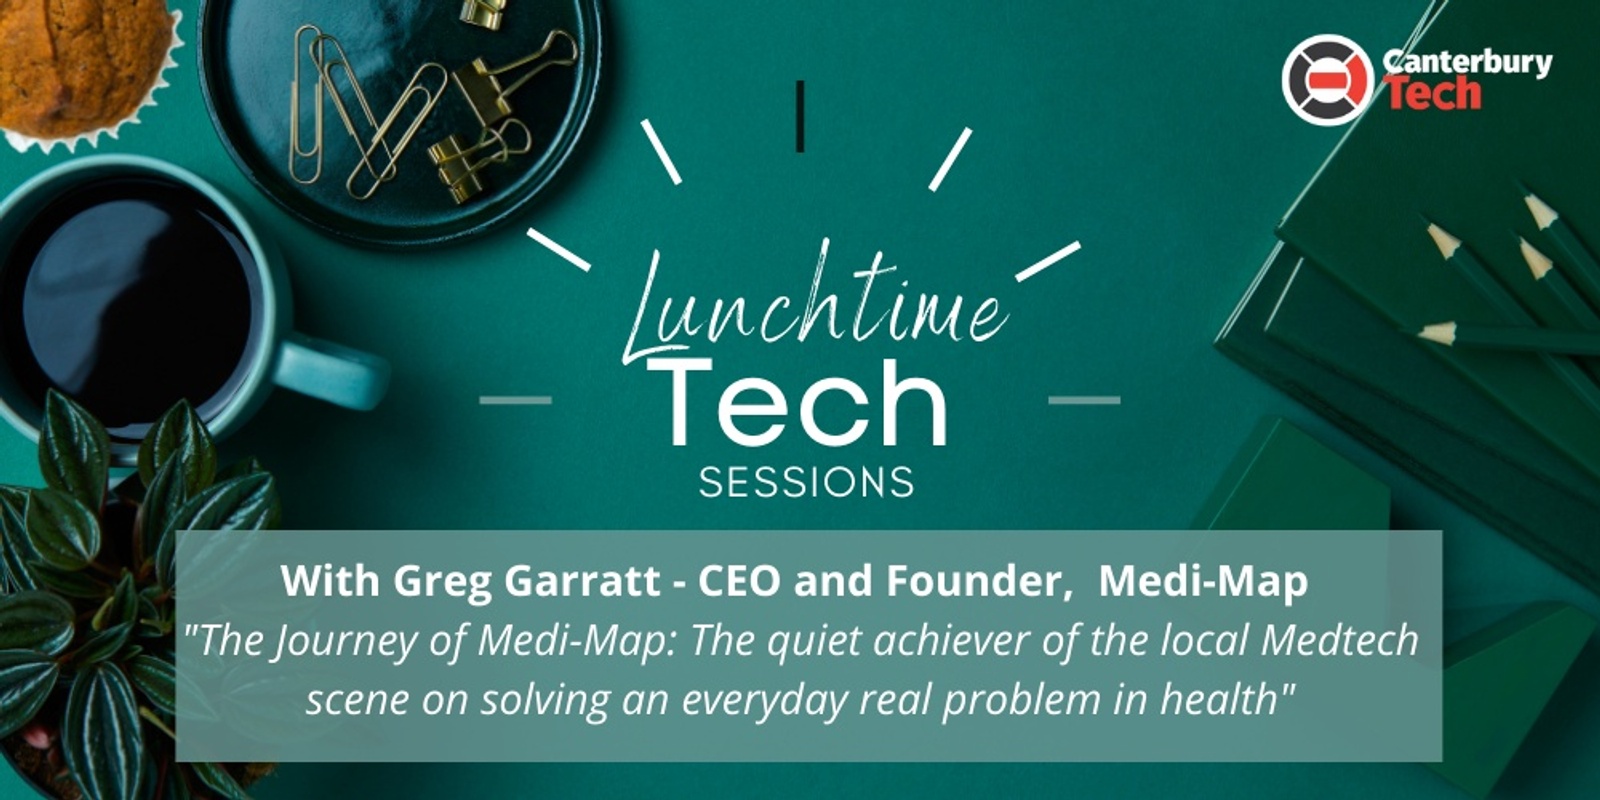 Banner image for Lunchtime Tech Sessions by Canterbury Tech - 24th May 2022